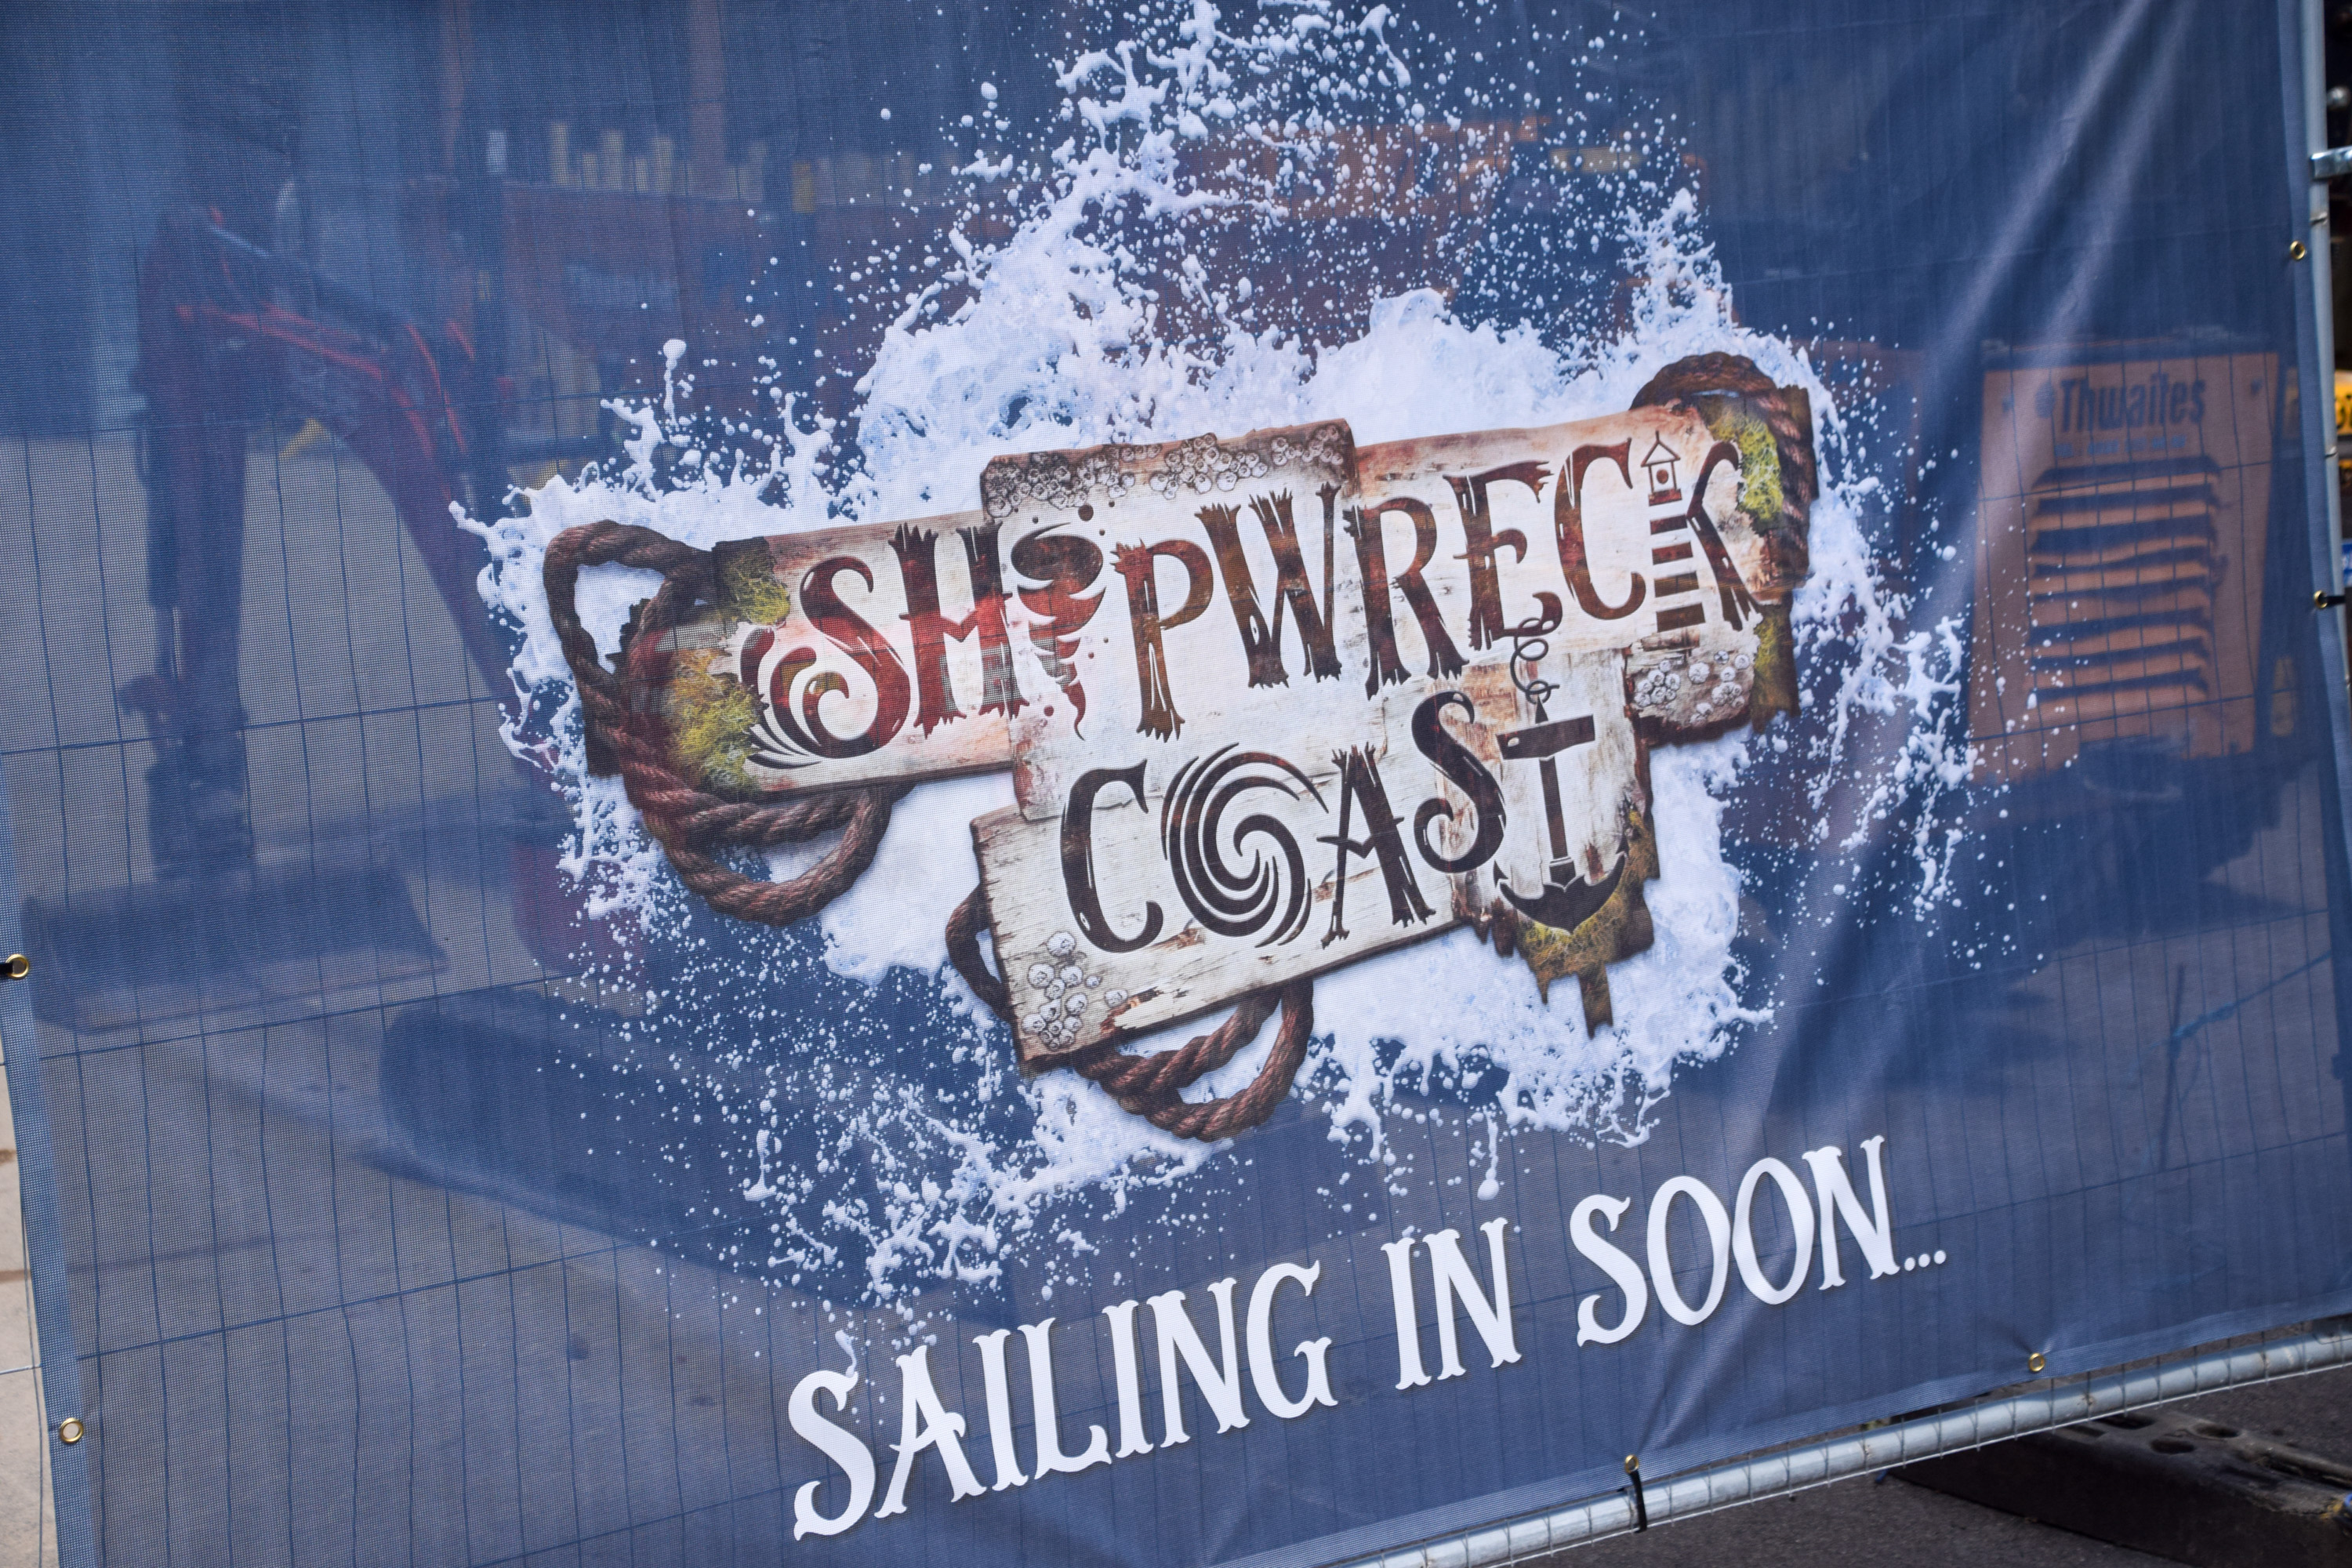 Shipwreck Coast Logo Released And Ride Testing Begins